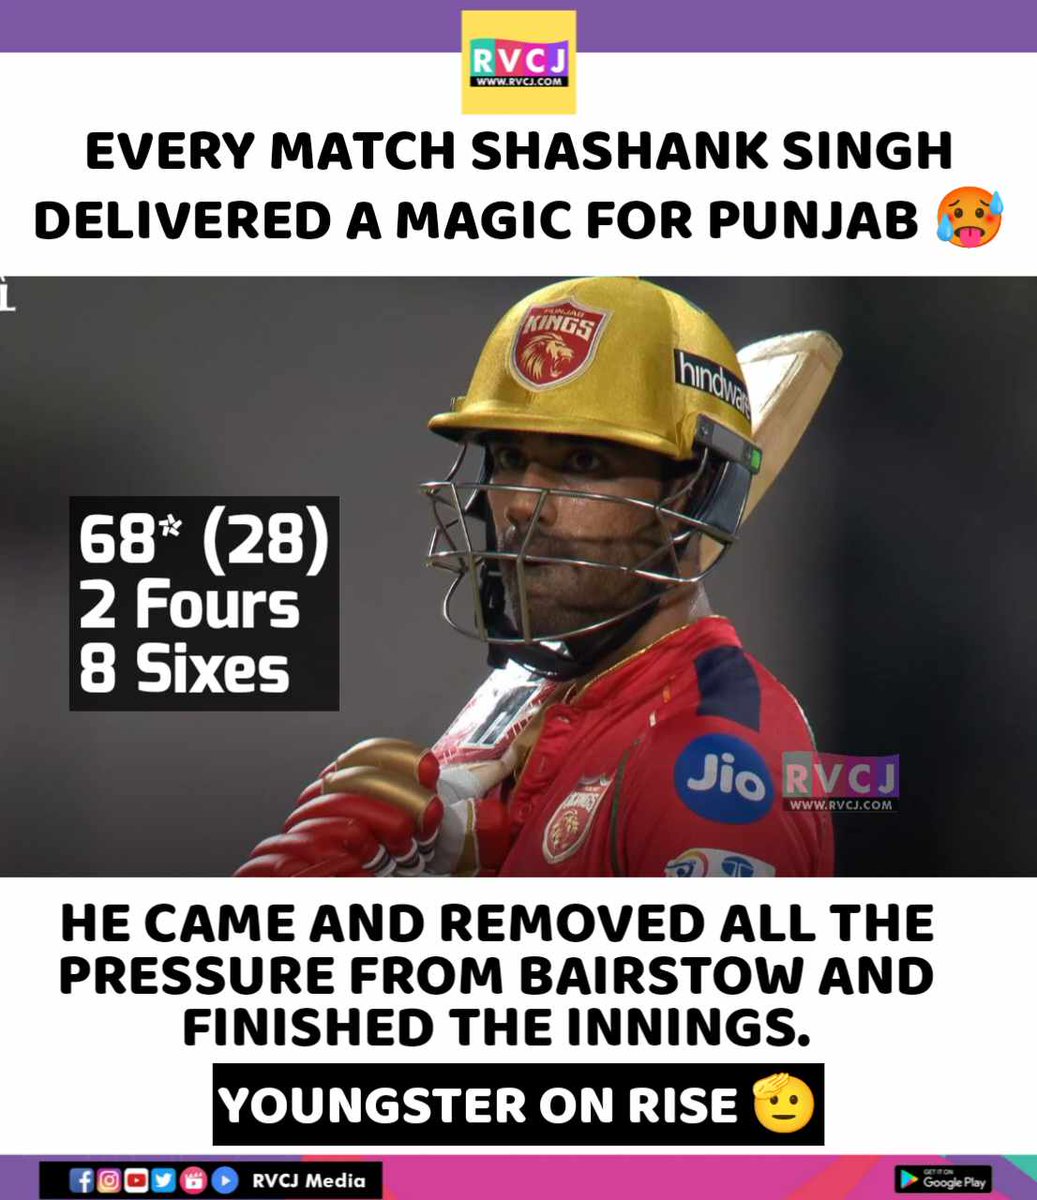 Every match SHASHANK SINGH DELIVERED A MAGIC FOR PANJAB 🔥💪
And Preity Zinta is happiest lady tonight 💐🔥❣️